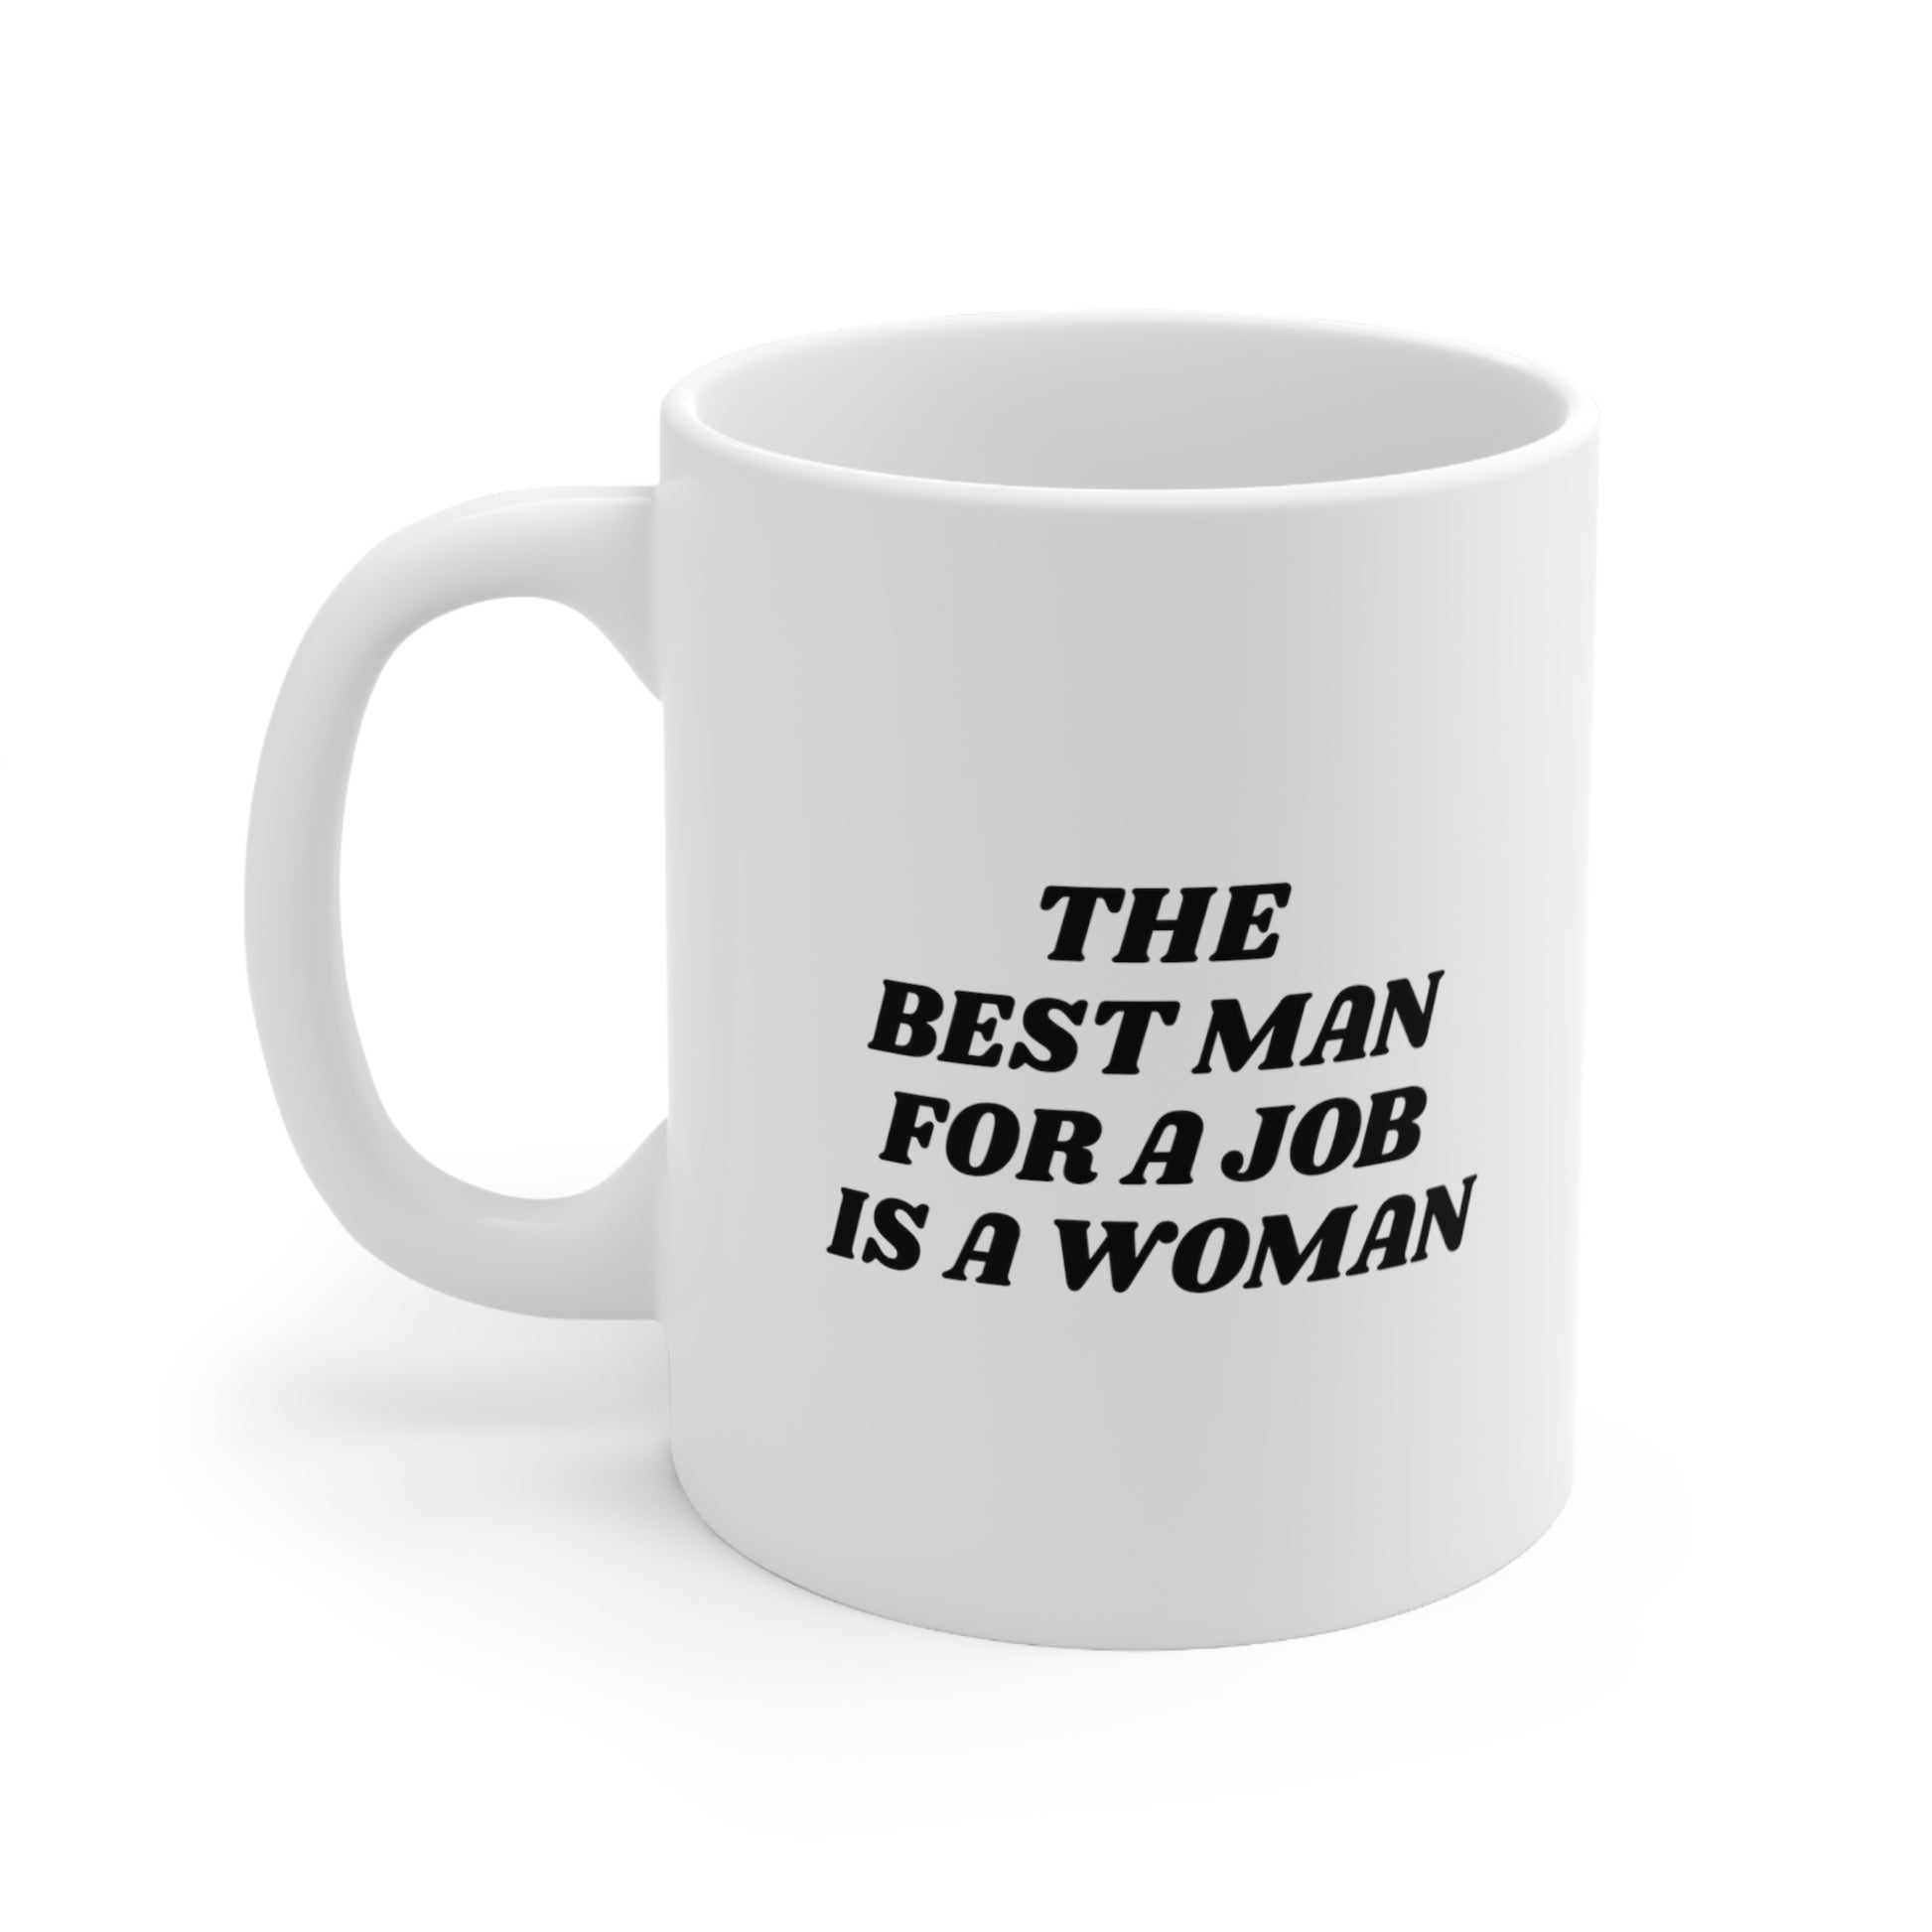 The Best Man For a Job is a Woman Coffee Mug